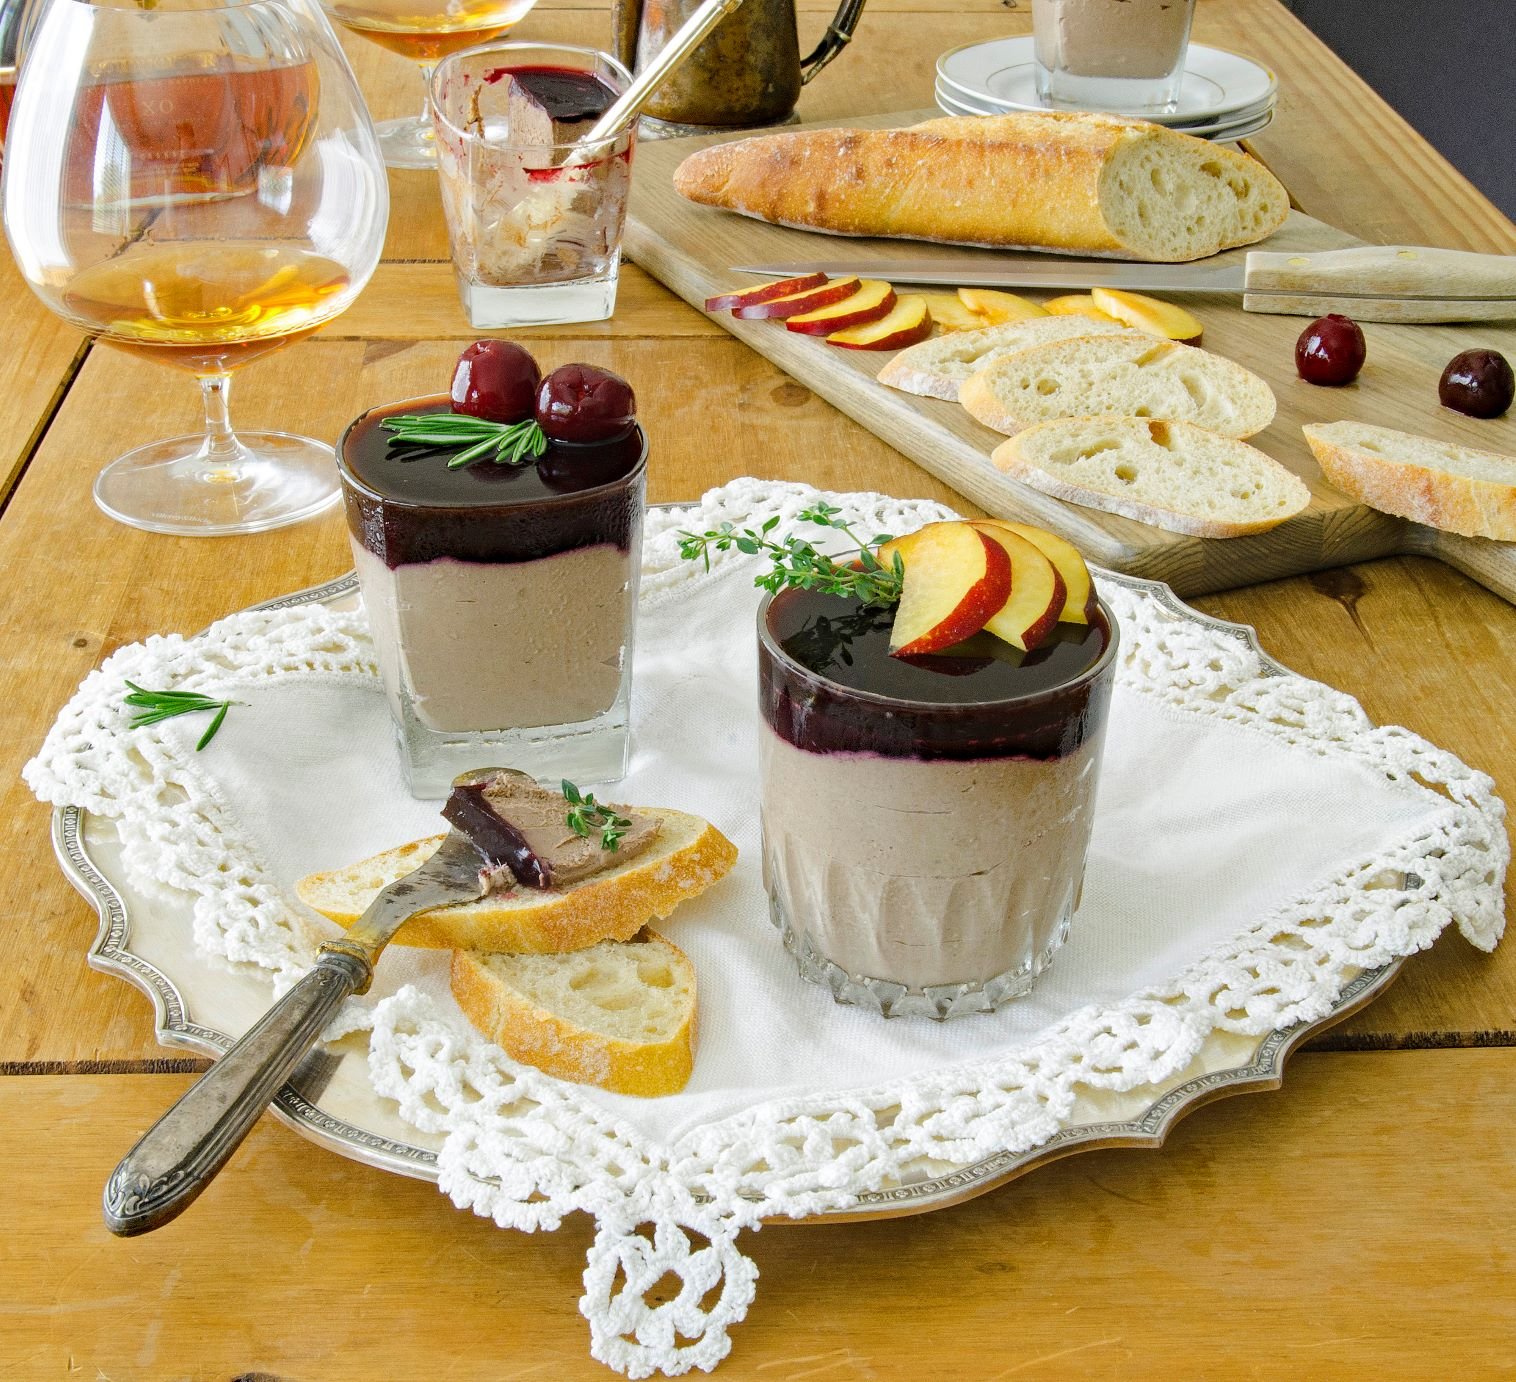 Chicken Liver Pate - The Daring Gourmet